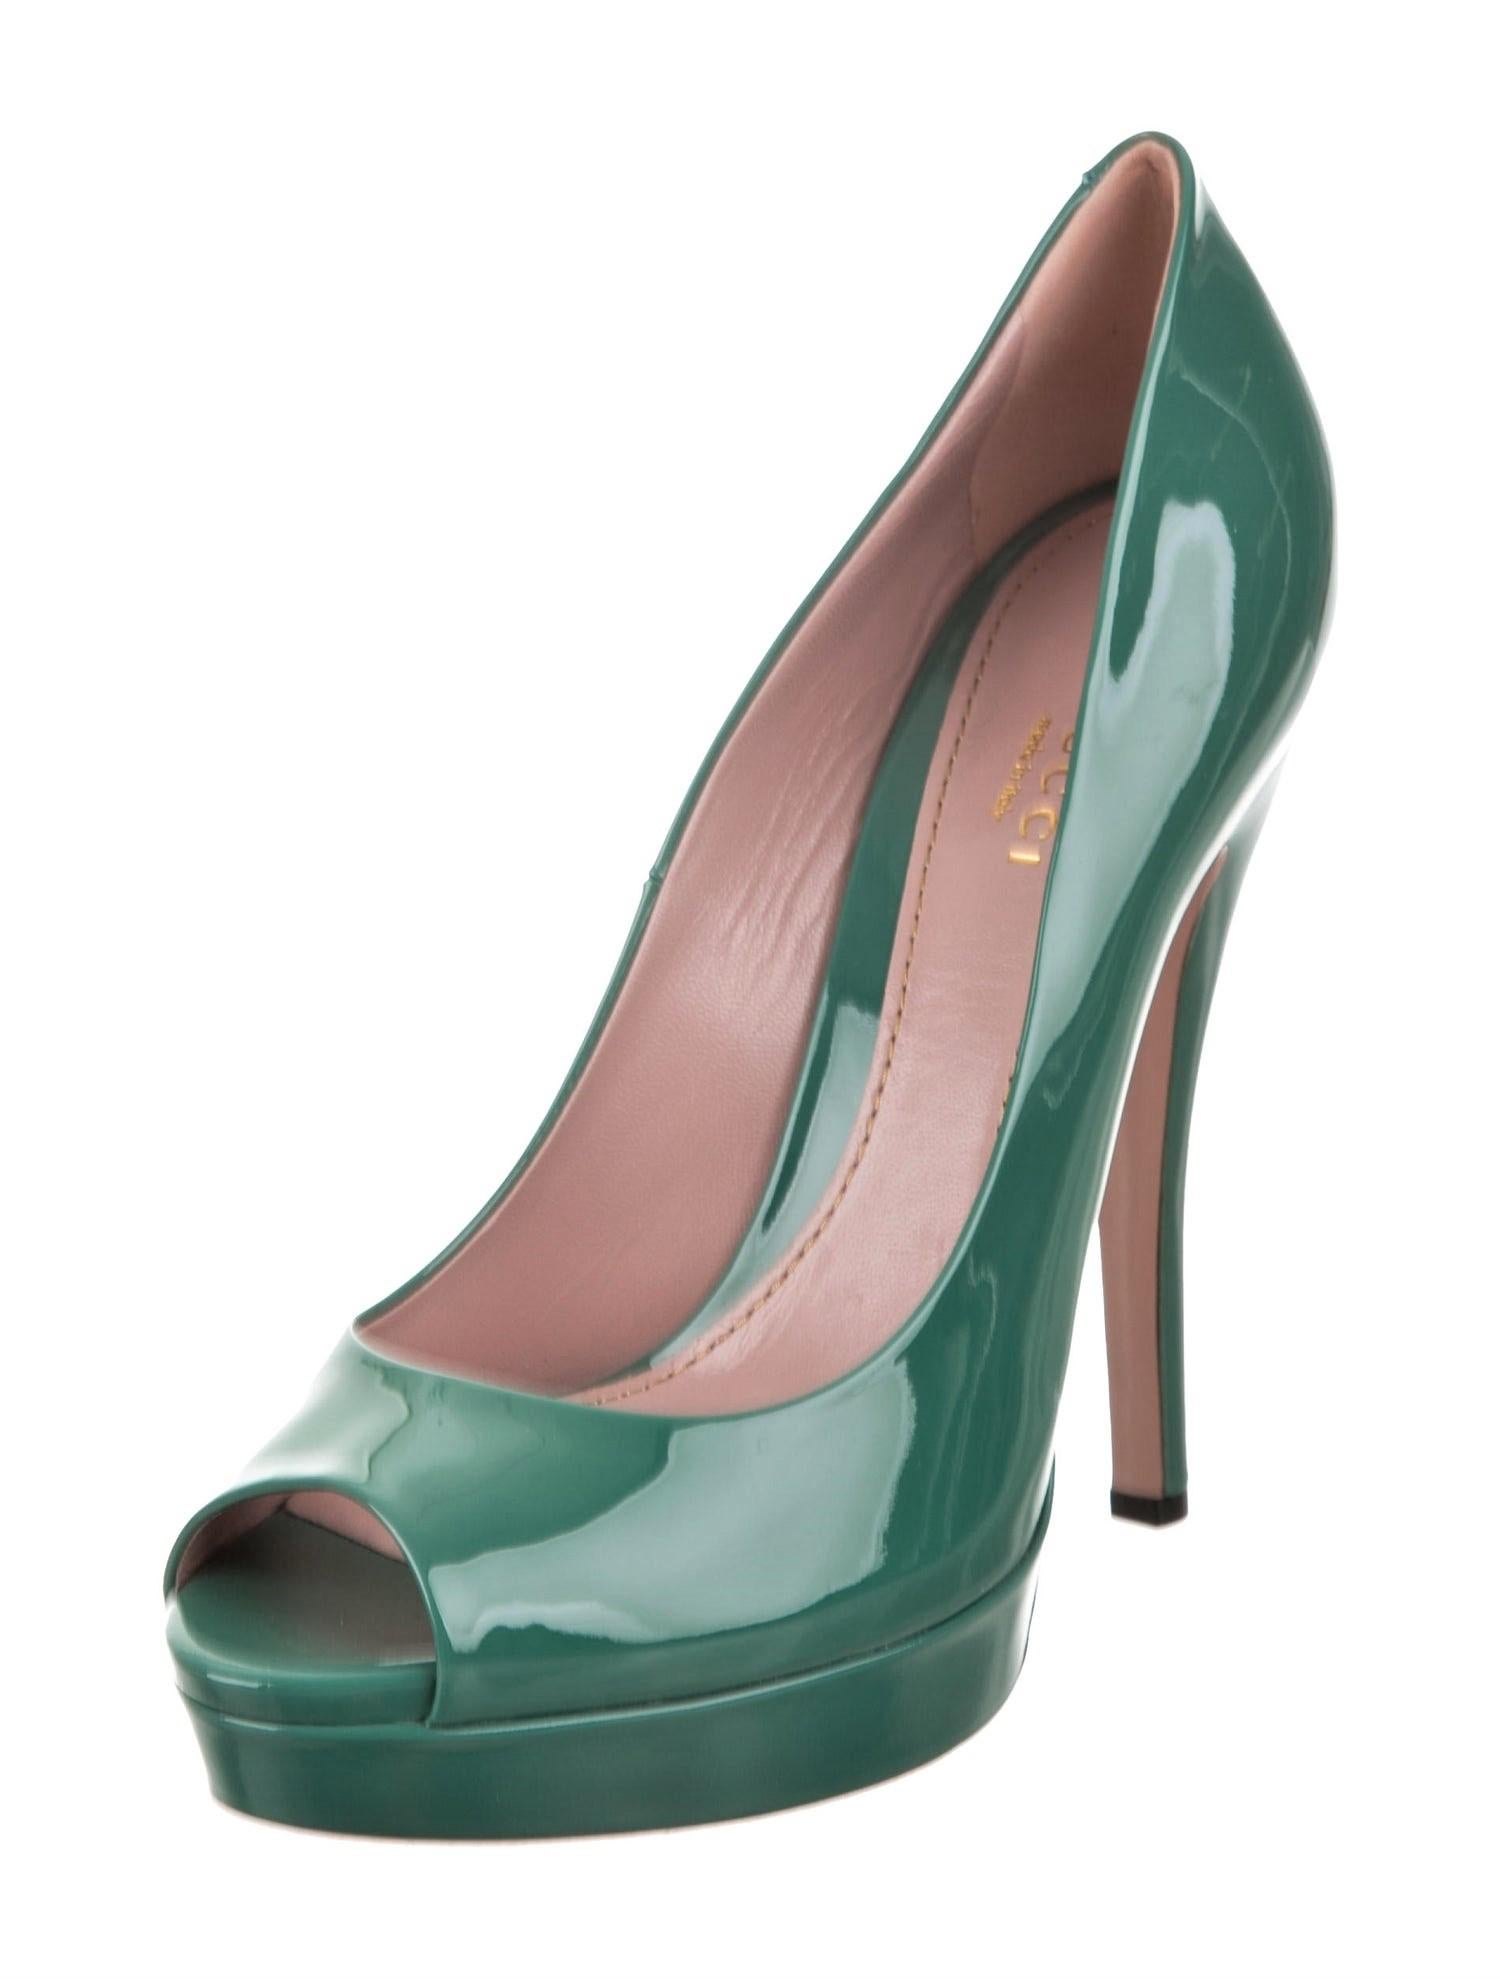 New Gucci Stunning Green Patent Leather Heels Pumps Sz 38 at 1stDibs ...